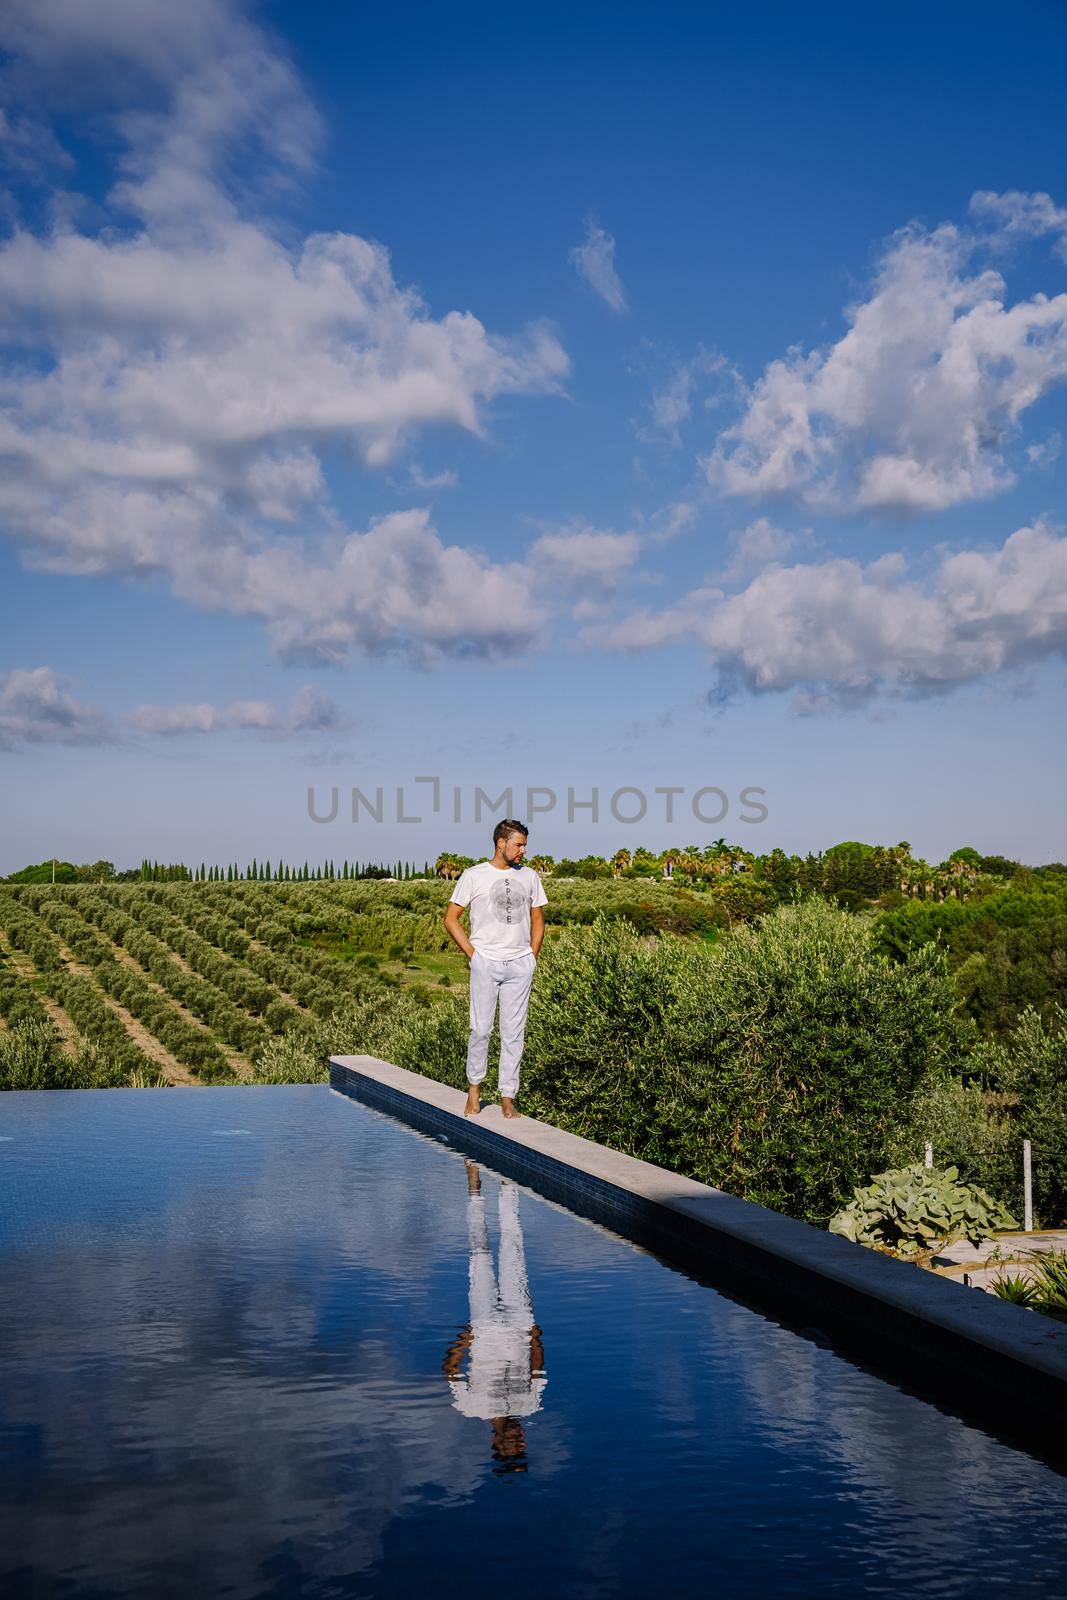 Luxury resort with a view over wine field in Selinunte Sicily Italy, infinity pool with a view over wine fields by fokkebok